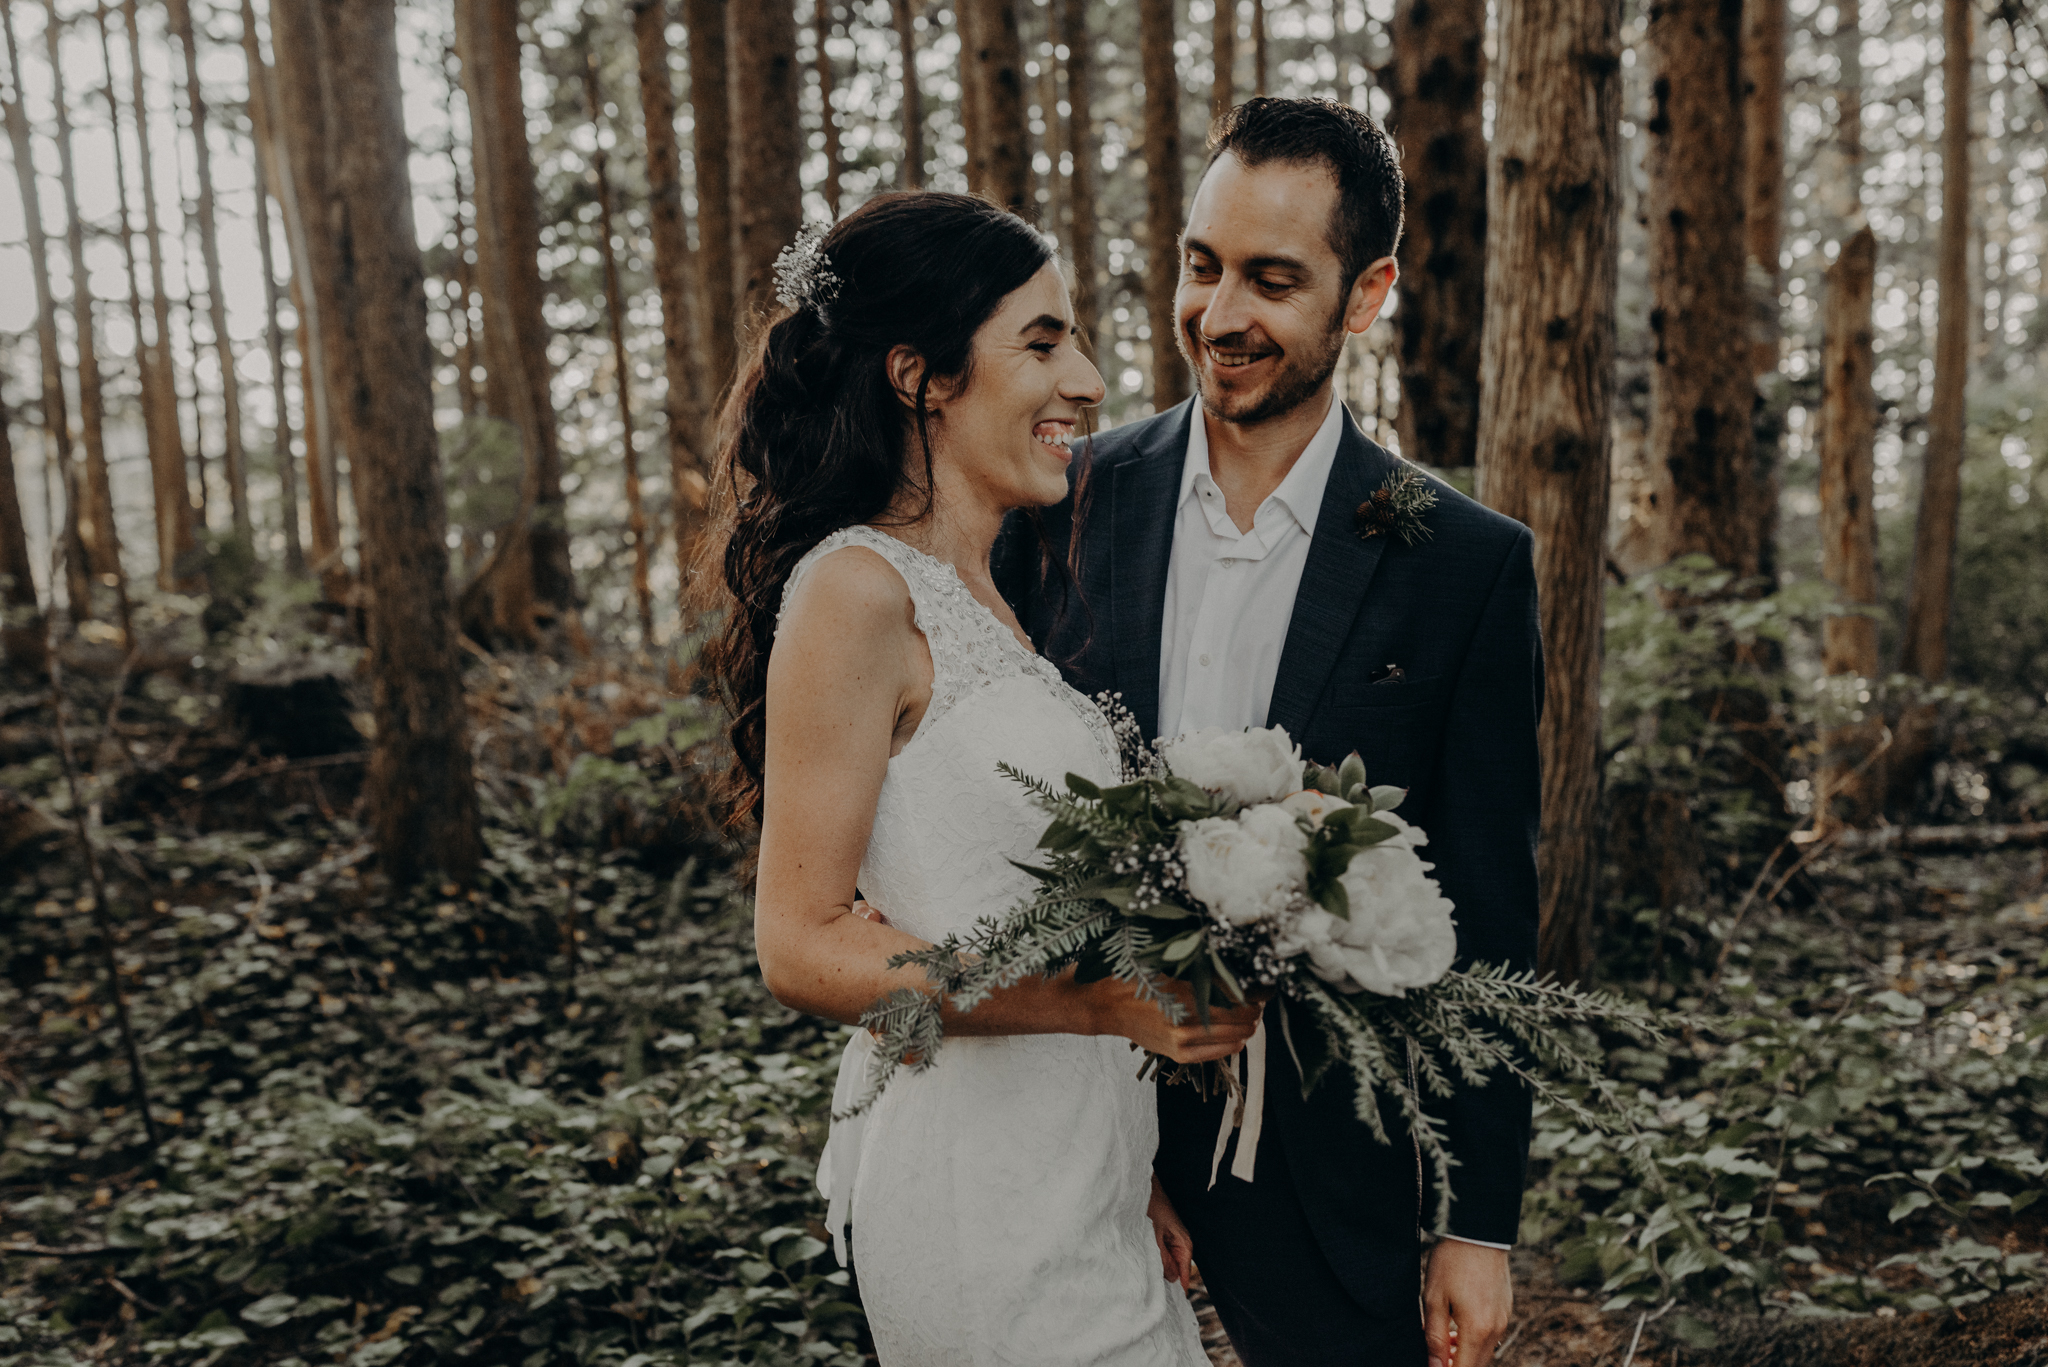 Isaiah + Taylor Photography - Cape Flattery Elopement, Olympia National Forest Wedding Photographer-096.jpg